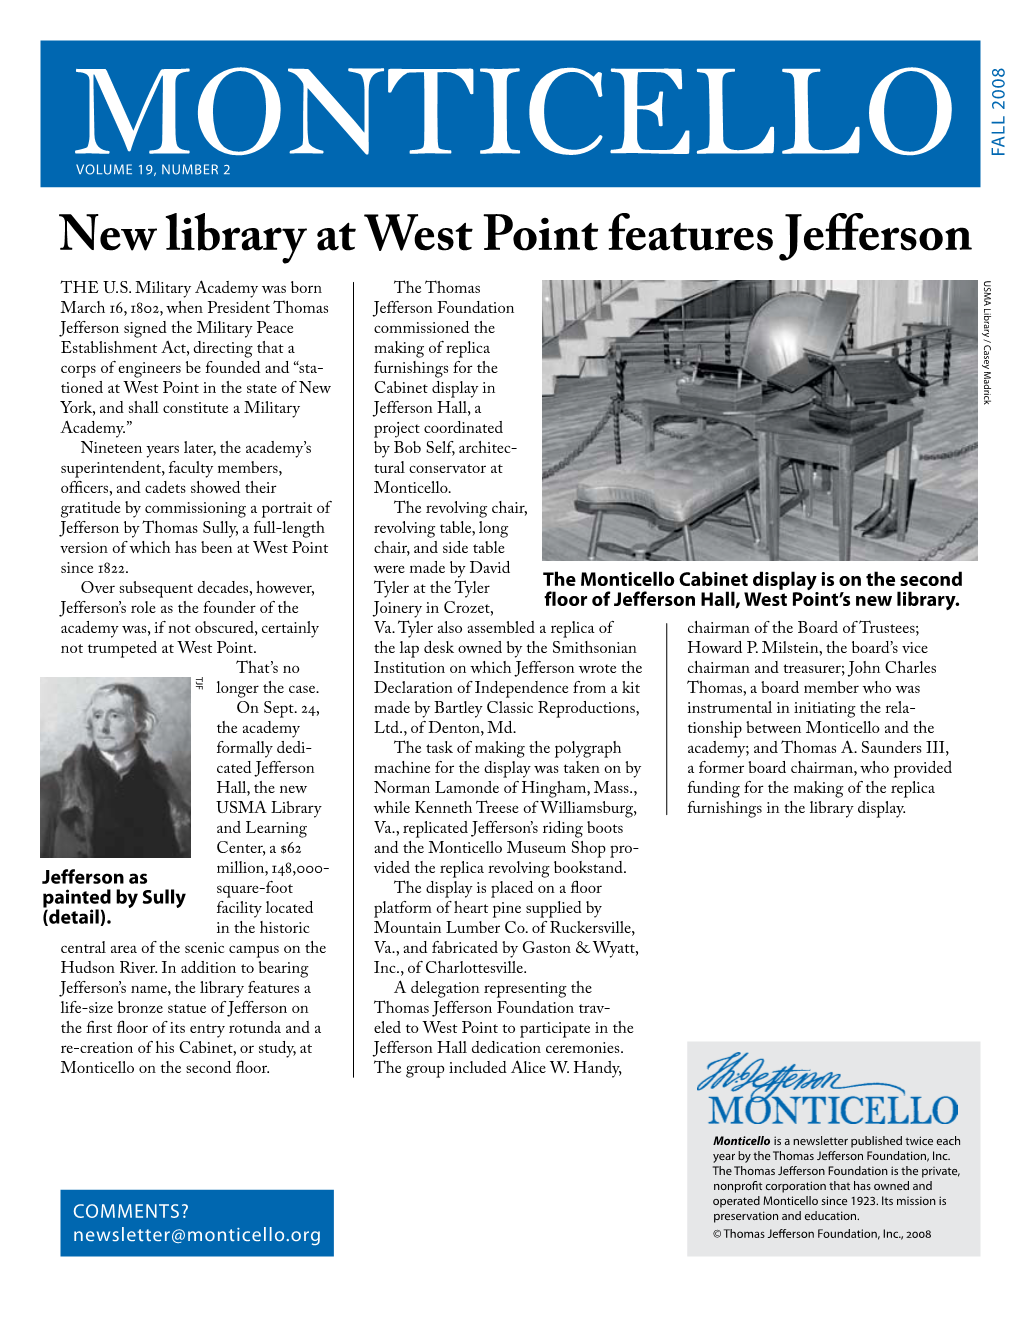 New Library at West Point Features